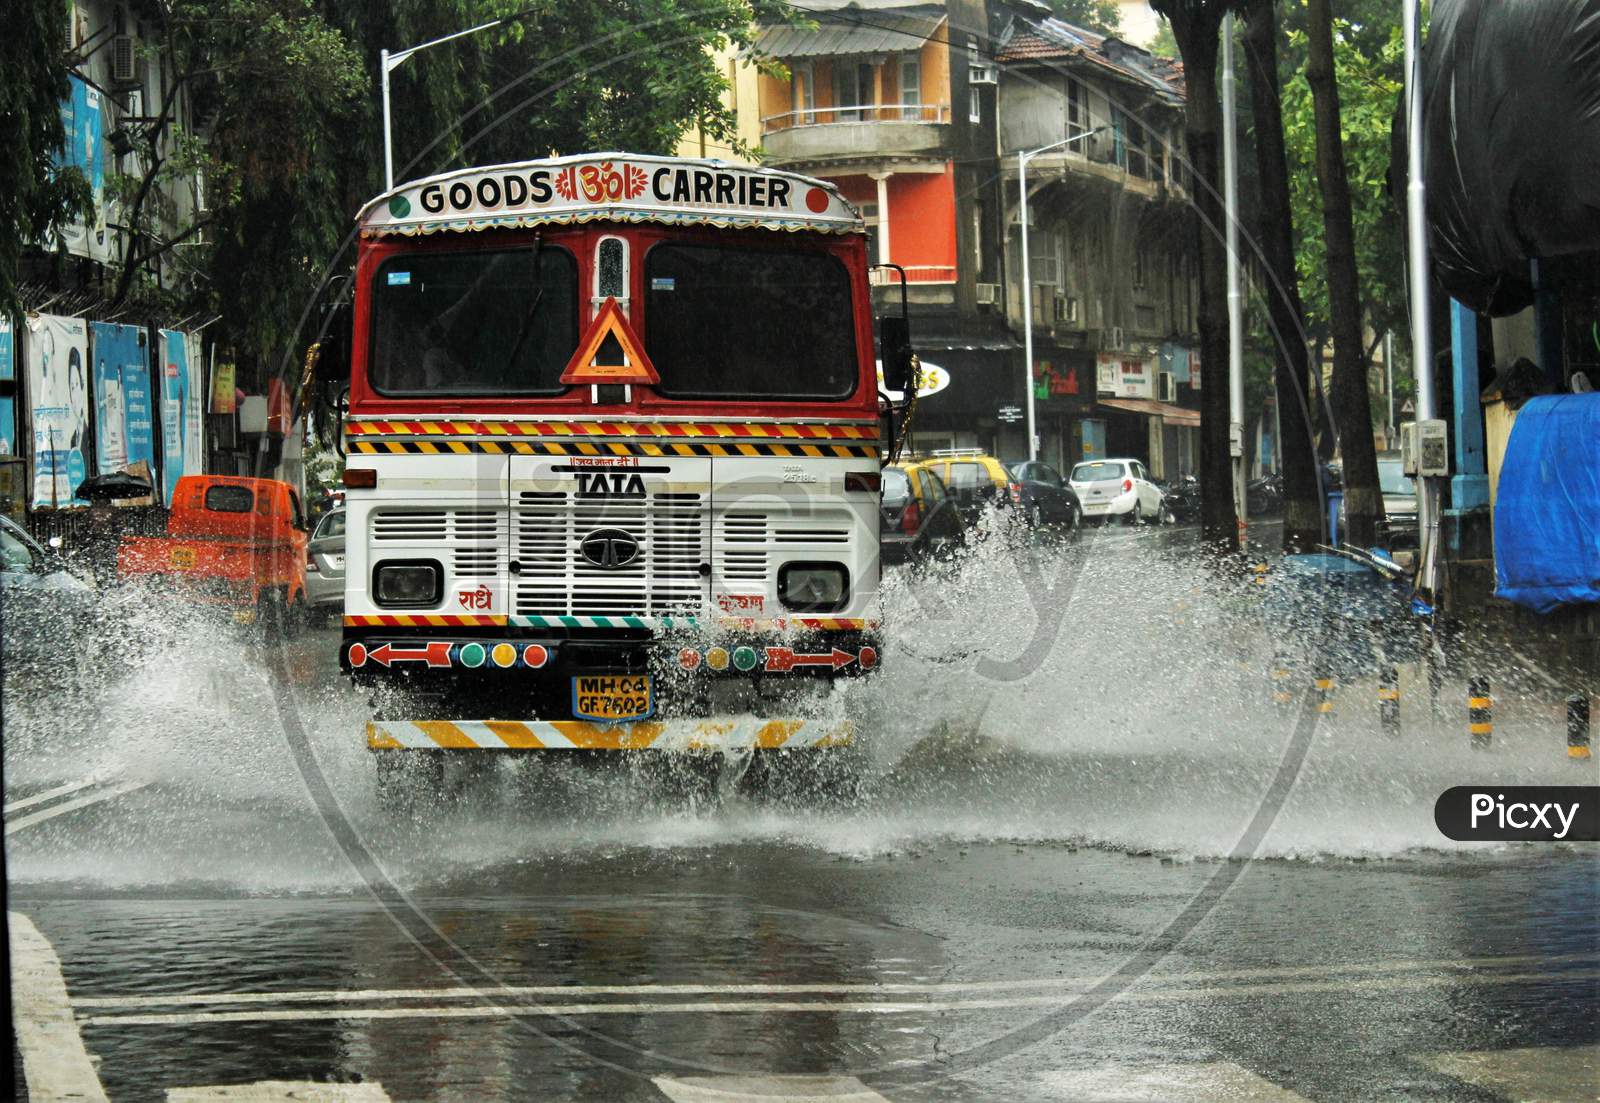 A truck drives through a waterlogged street during heavy rains, in Mumbai on July 4, 2020.